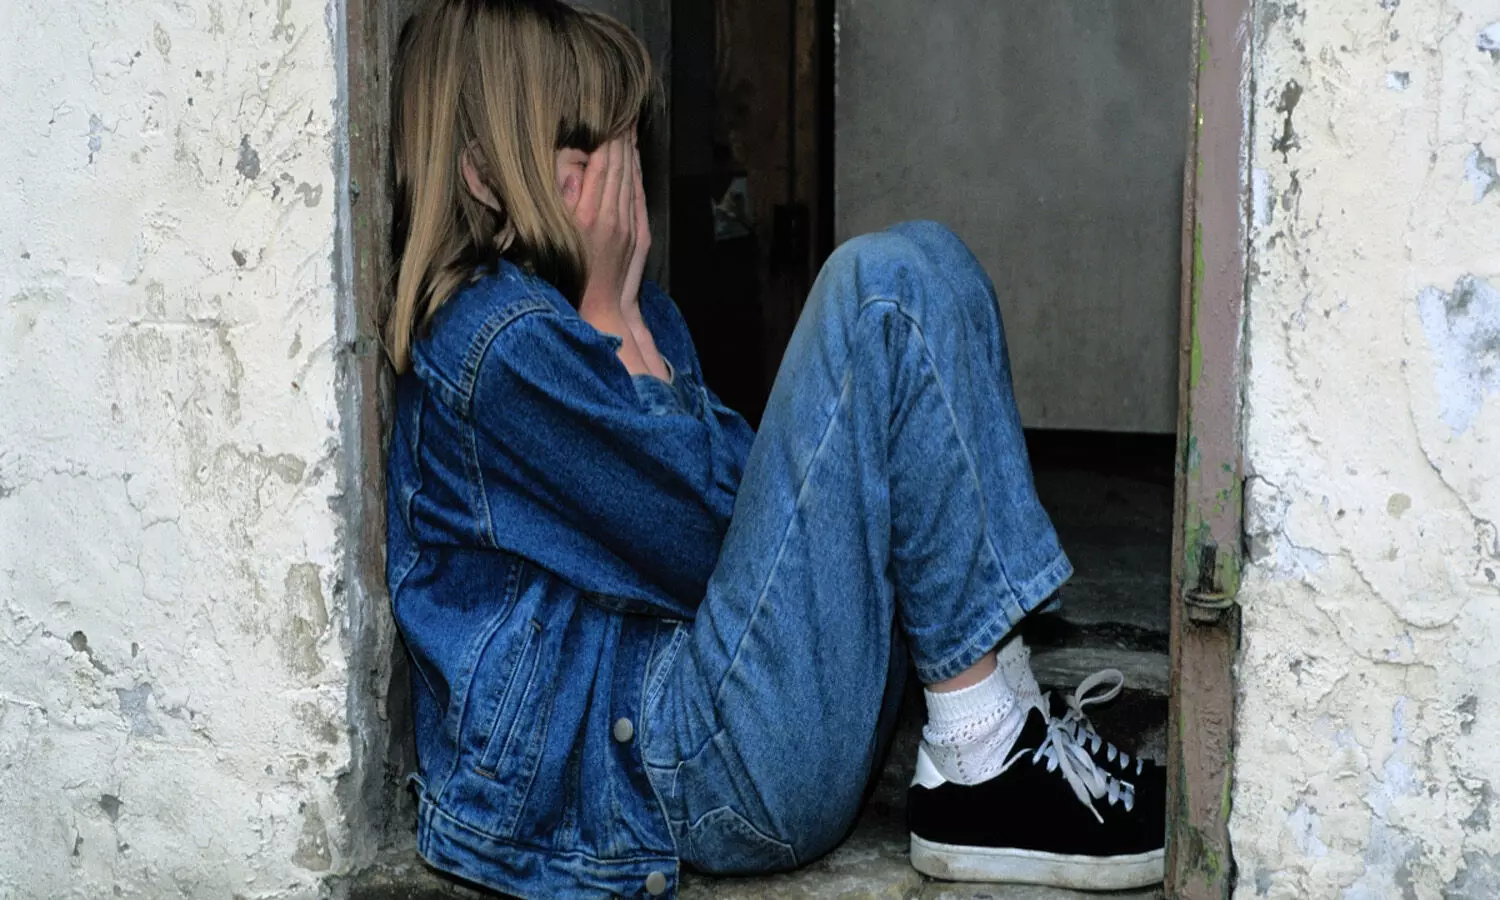 Depression can affect people of any age including kids.